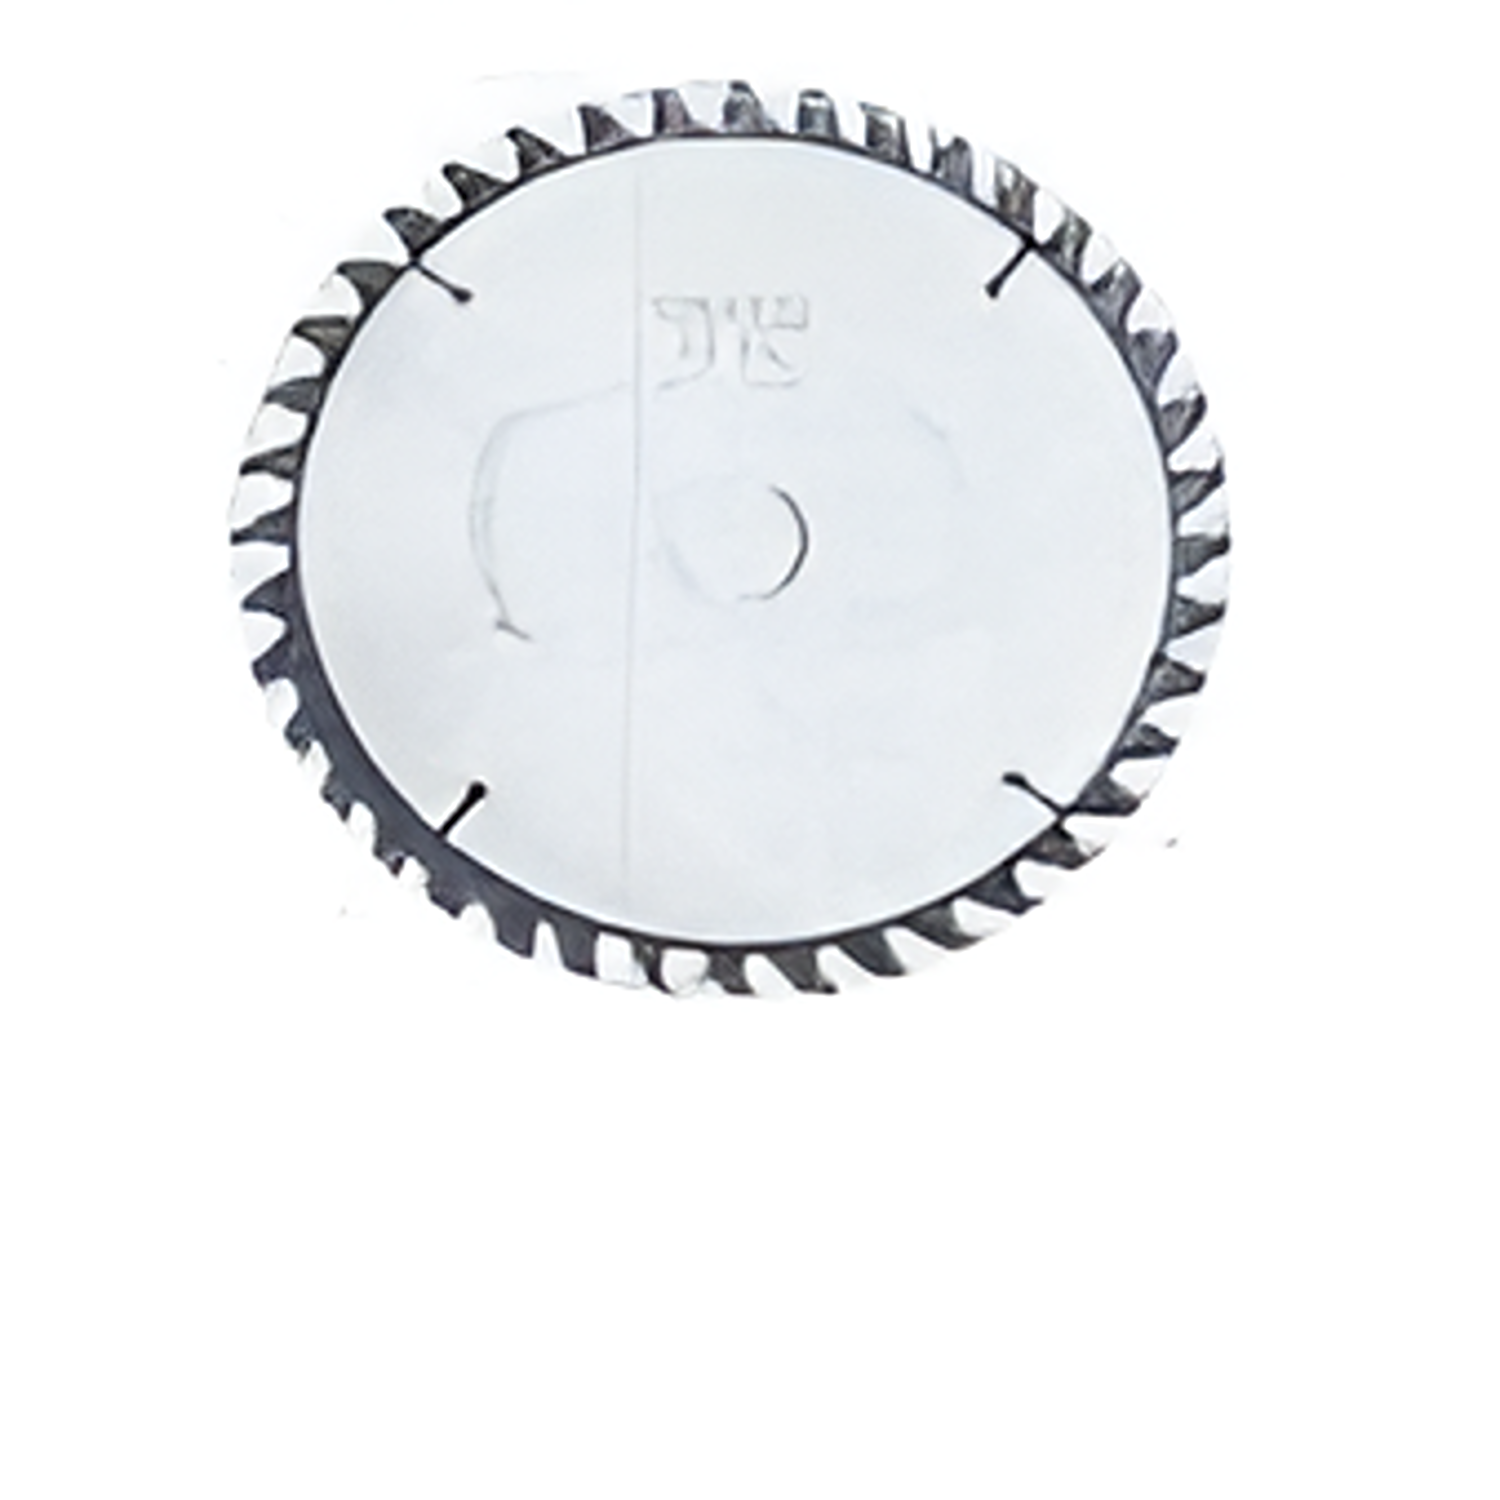 YEW AIK AE00663 Tipped Circular Saw Blade for Aluminium - Premium Tipped Circular Saw Blade from YEW AIK - Shop now at Yew Aik.